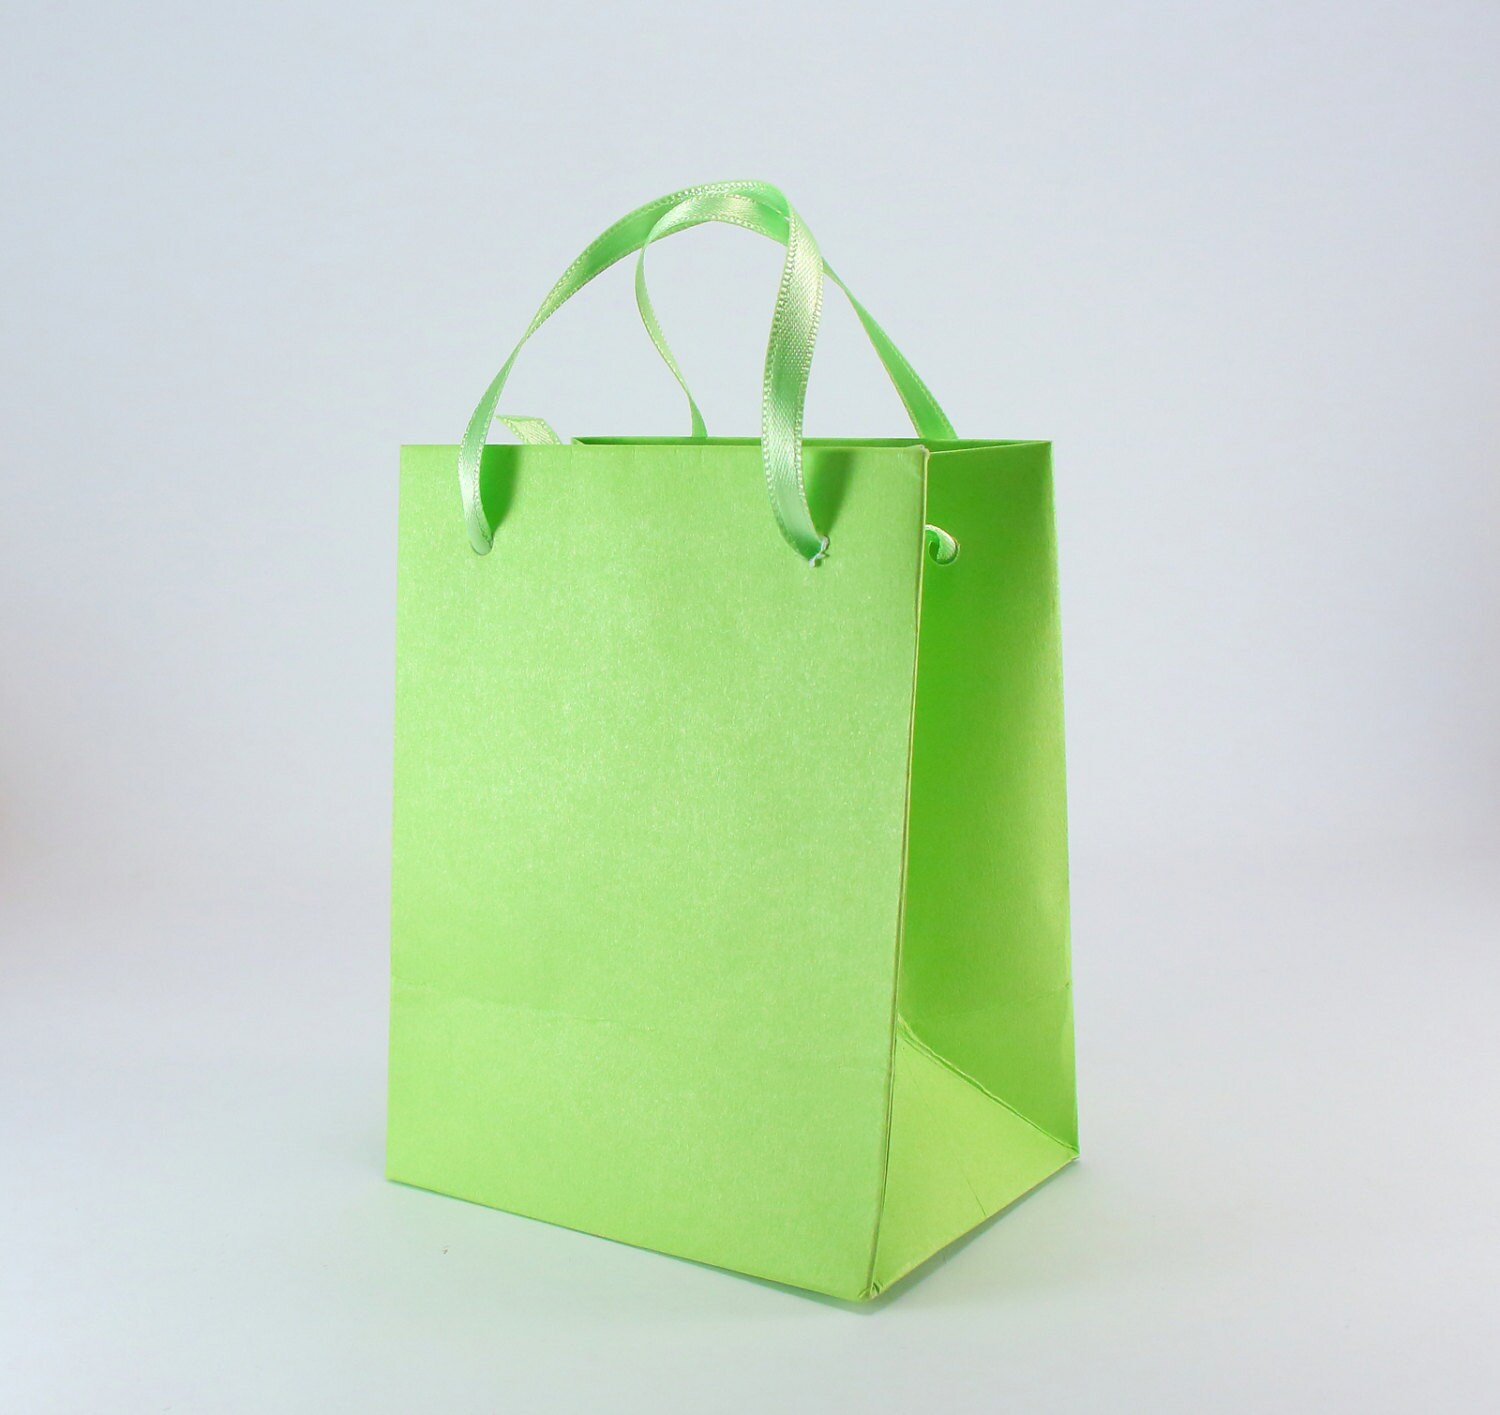 45 Extra Small Gift Bags in Lime Green Color with sating